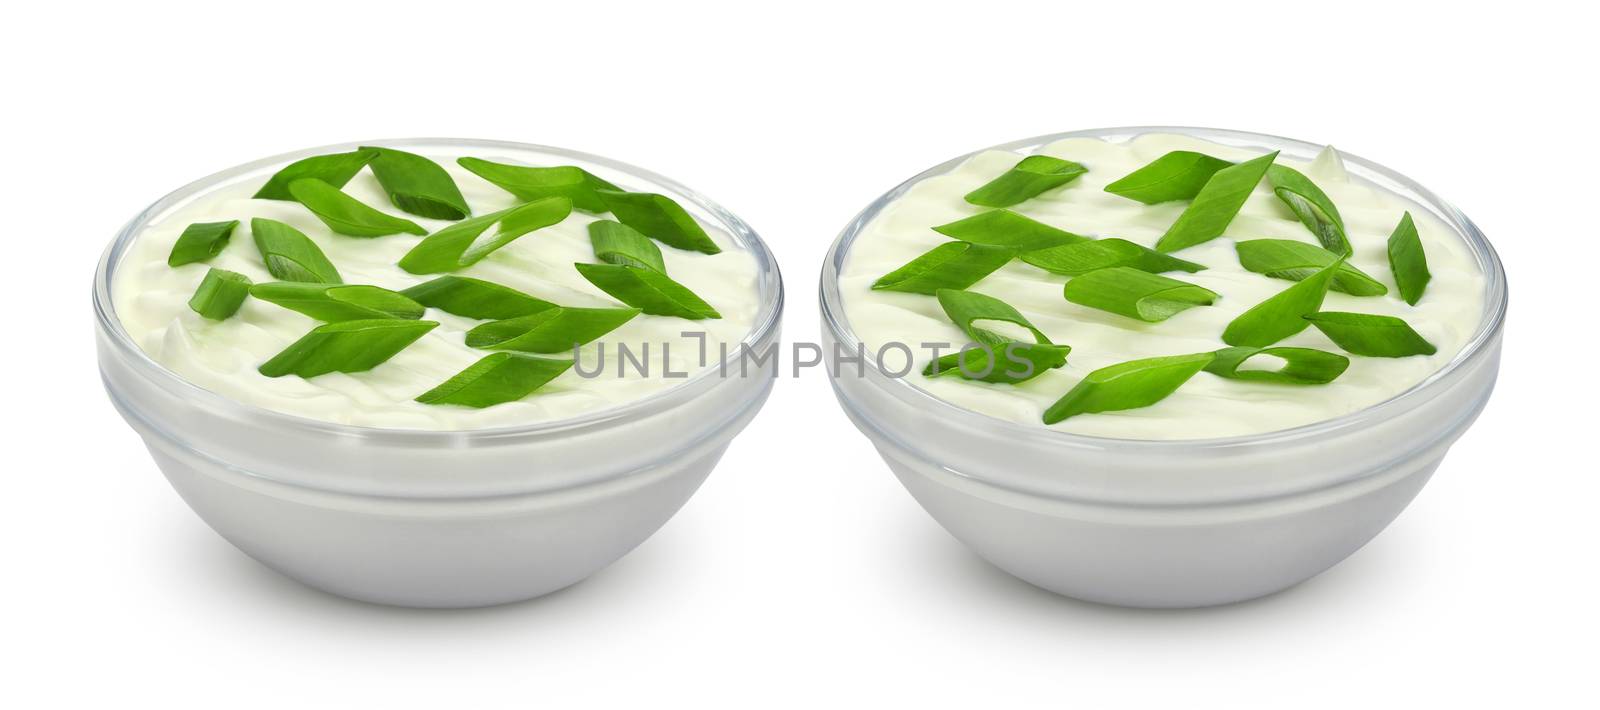 Sour cream and onion isolated on white background by xamtiw